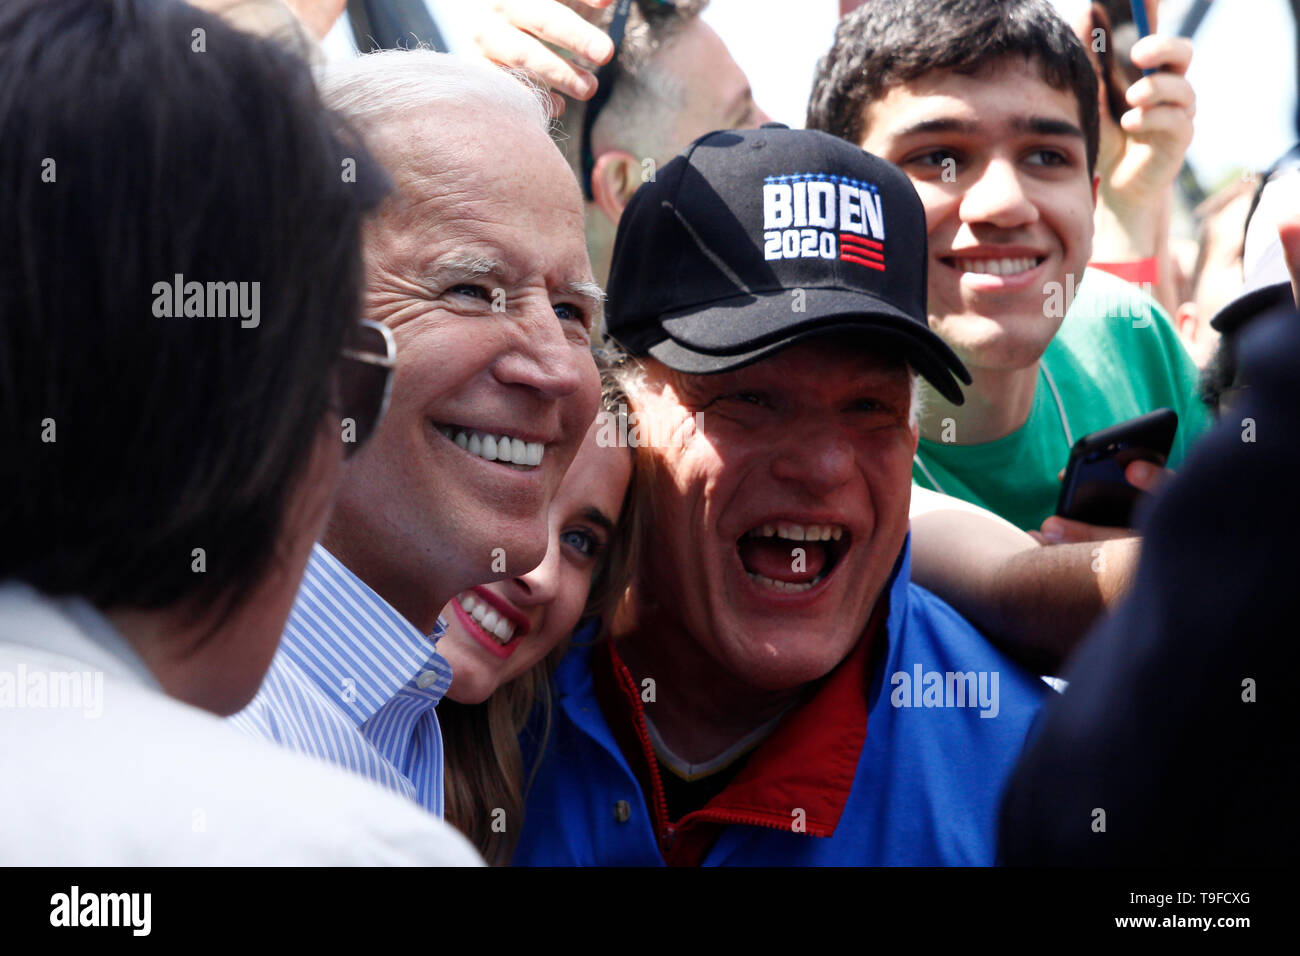 Philadelphia, PA, USA - May 18th May, 2019: Joe Biden greets supporters after kicking off his campaign for the 2020 United States presidential election, at an outdoor rally on the Benjamin Franklin Parkway in Philadelphia, Pennsylvania. Credit: OOgImages/Alamy Live News Stock Photo